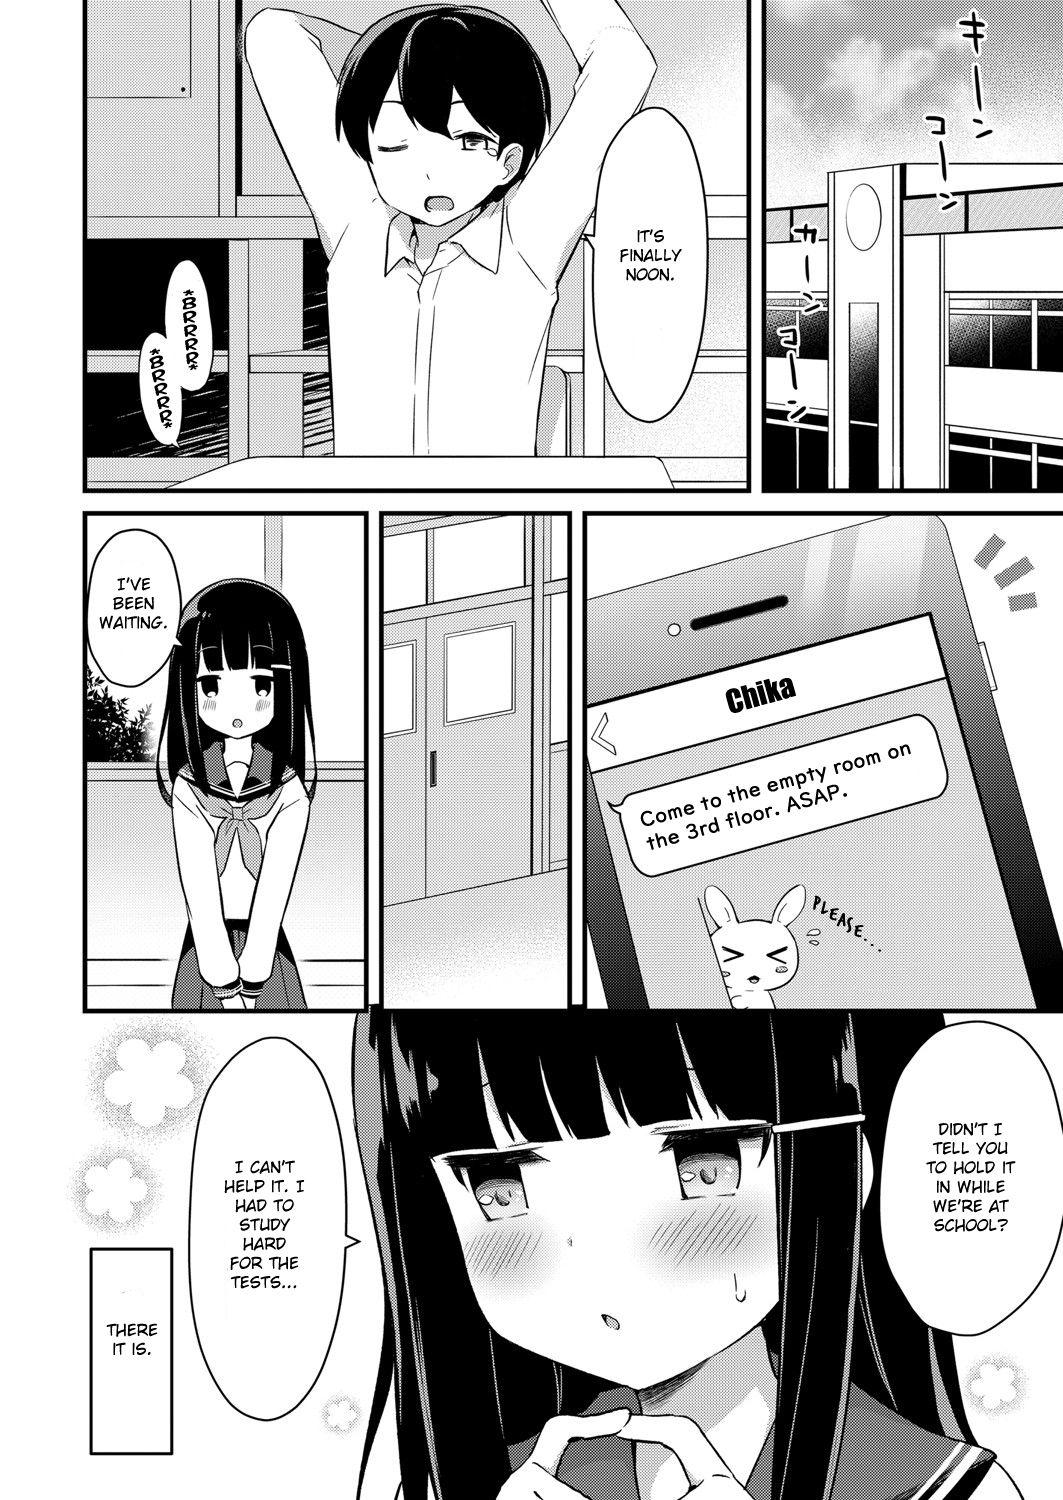 Magrinha [Tiger] Yuuwaku・Imouto #2 Onii-chan wa seishori gakari | Little Sister Temptation #2 Onii-chan is in Charge of My Libido Management (COMIC Reboot Vol. 07) [English] [Digital] Bubblebutt - Page 4